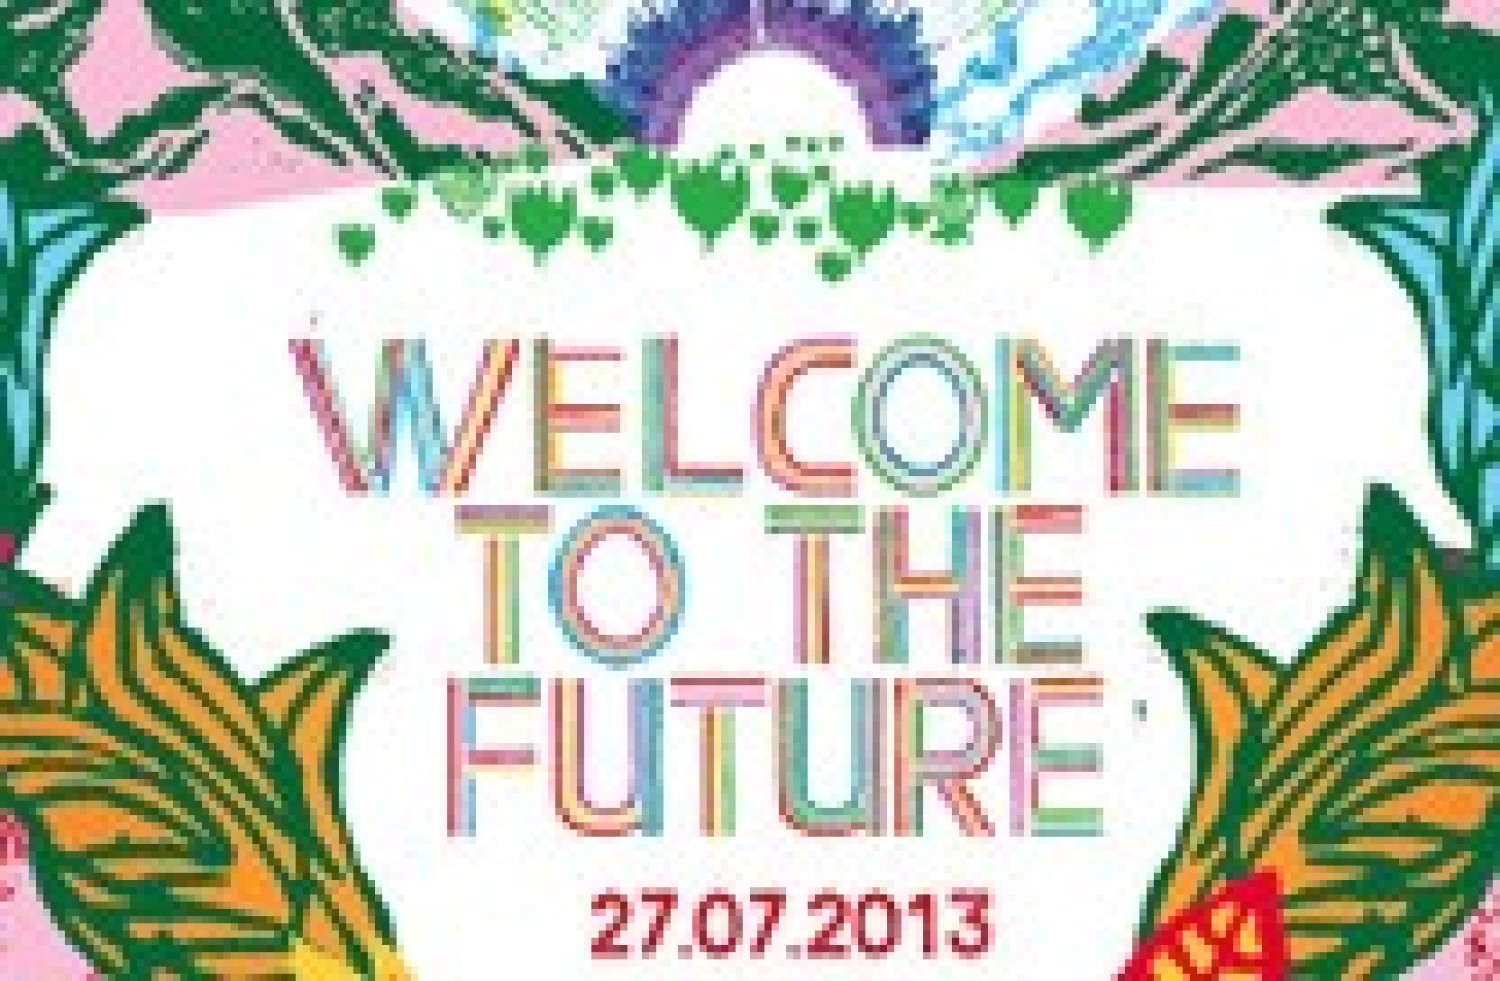 Party report: Welcome to the Future, 't Twiske, 27 juli 2013